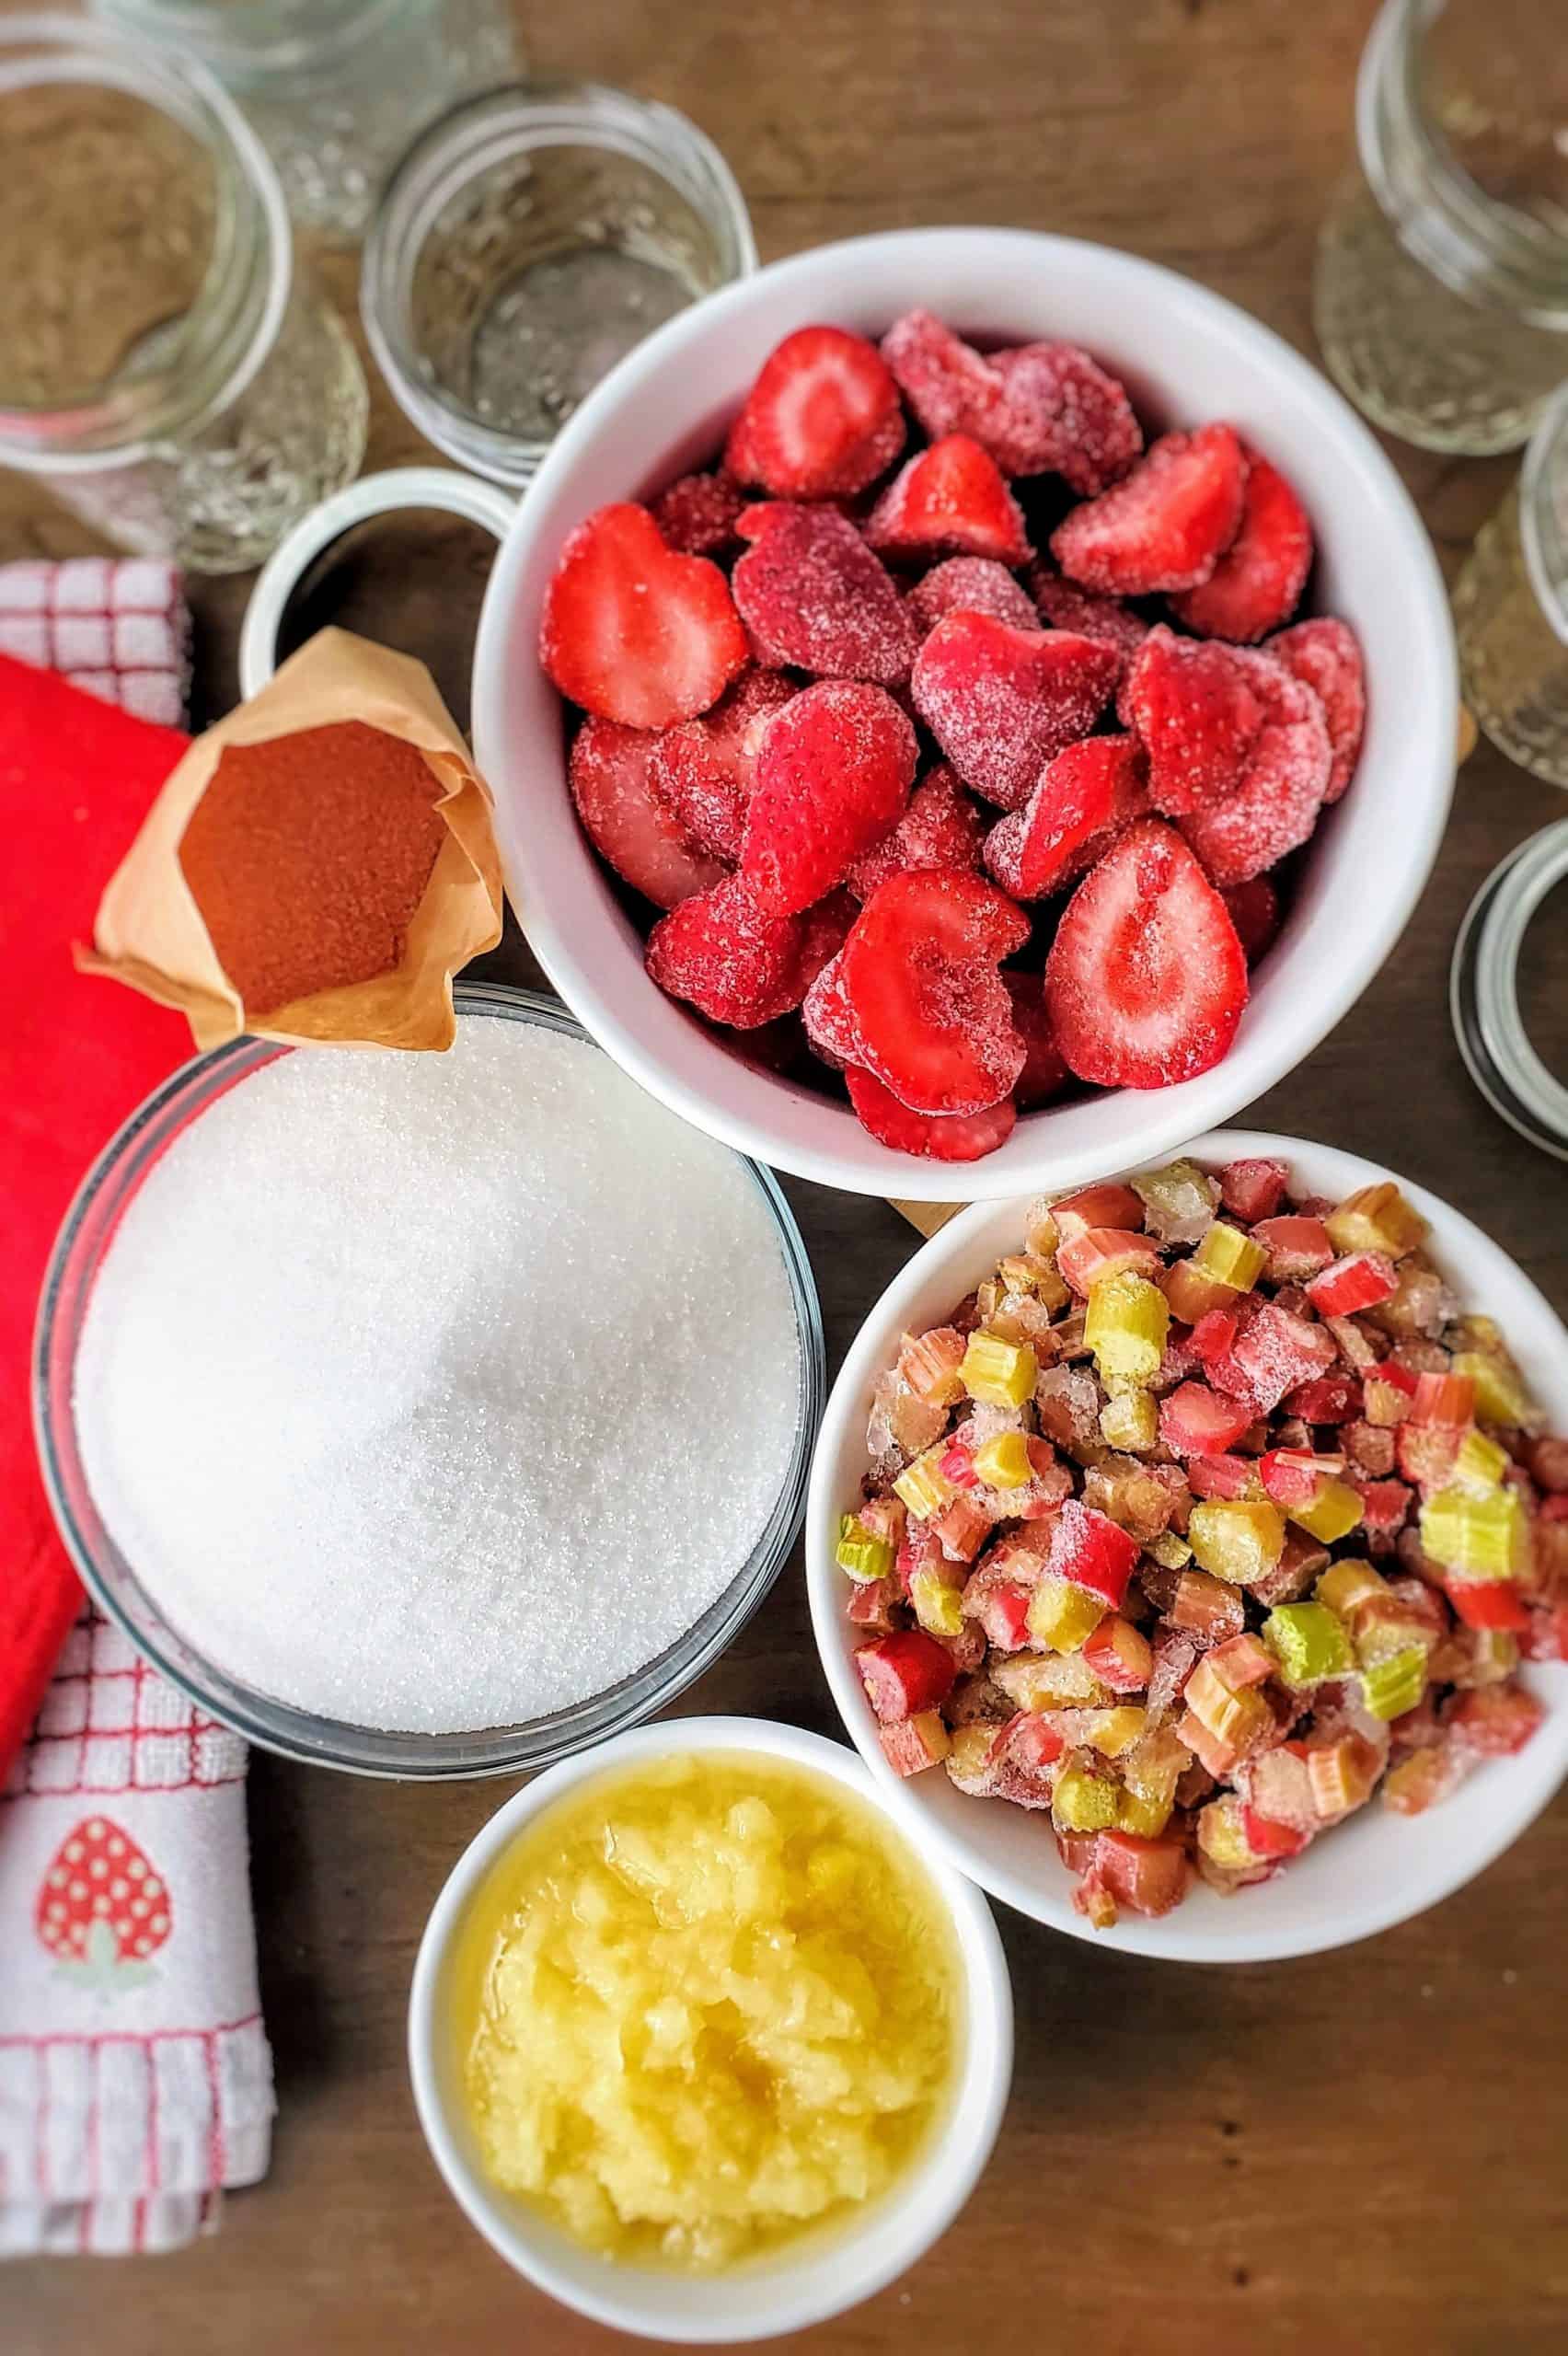 Ingredients needed: frozen sliced strawberries, frozen diced rhubarb, 1 can (8 ounces) crushed pineapple, granulated sugar, strawberry-flavored gelatin.